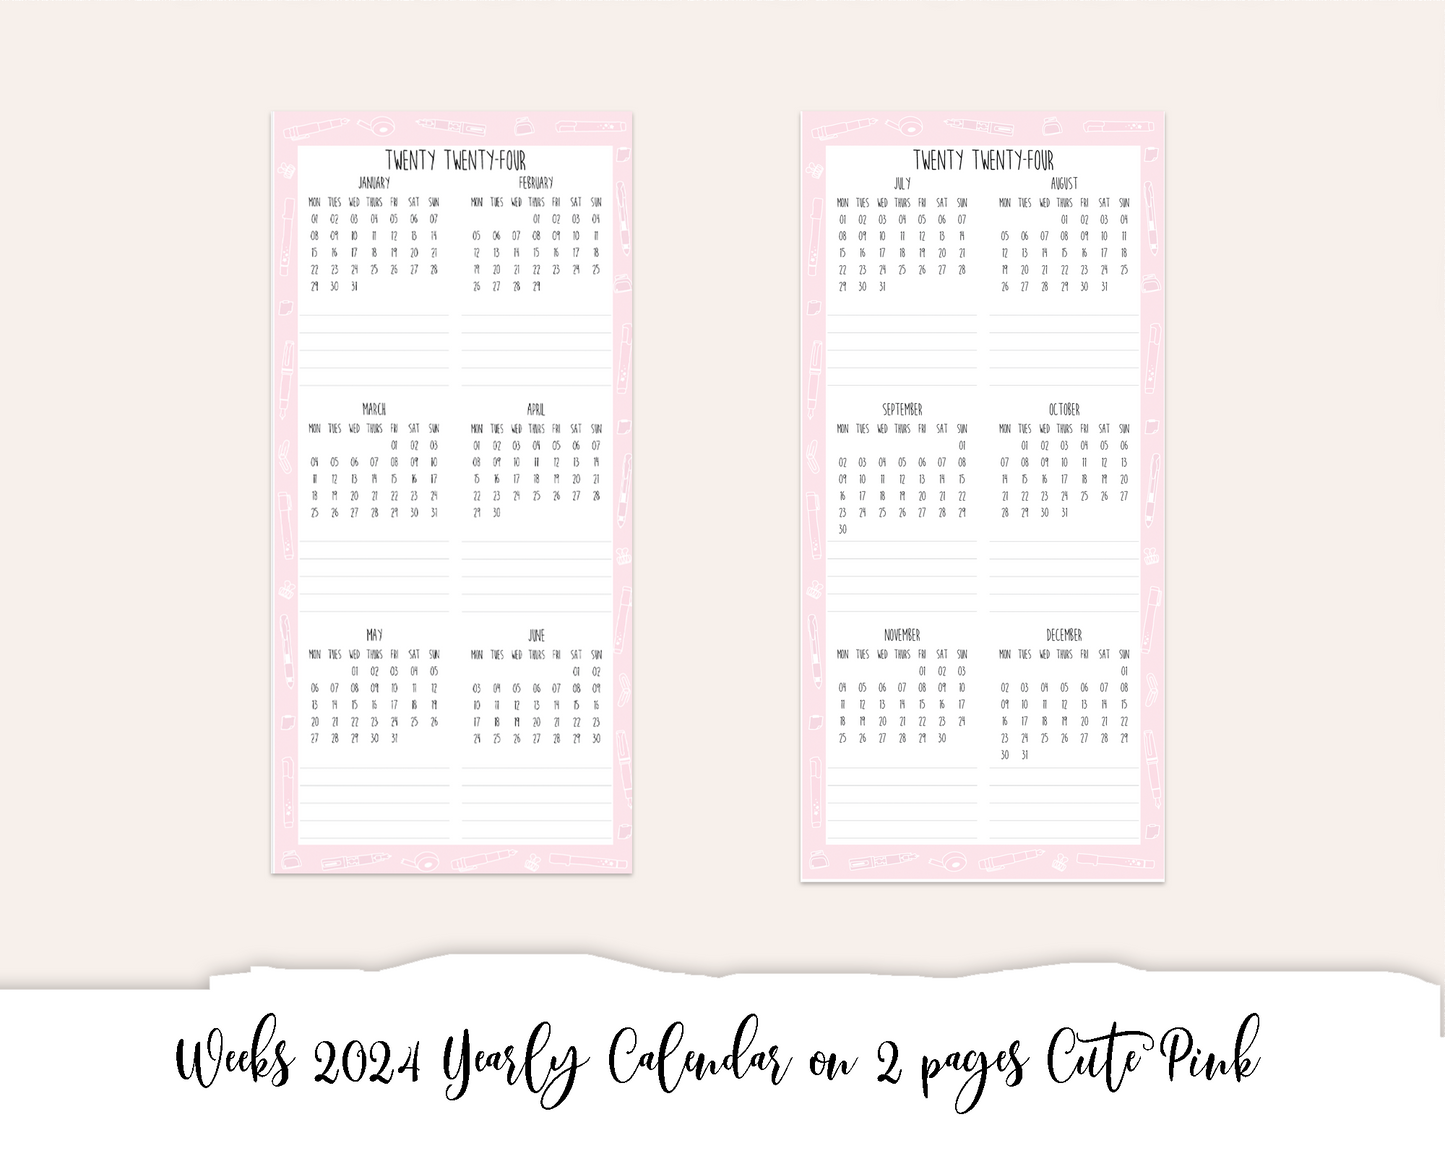 Weeks 2024 Yearly Calendar on 2 pages Cute Pink (Full Page Printable Stickers)